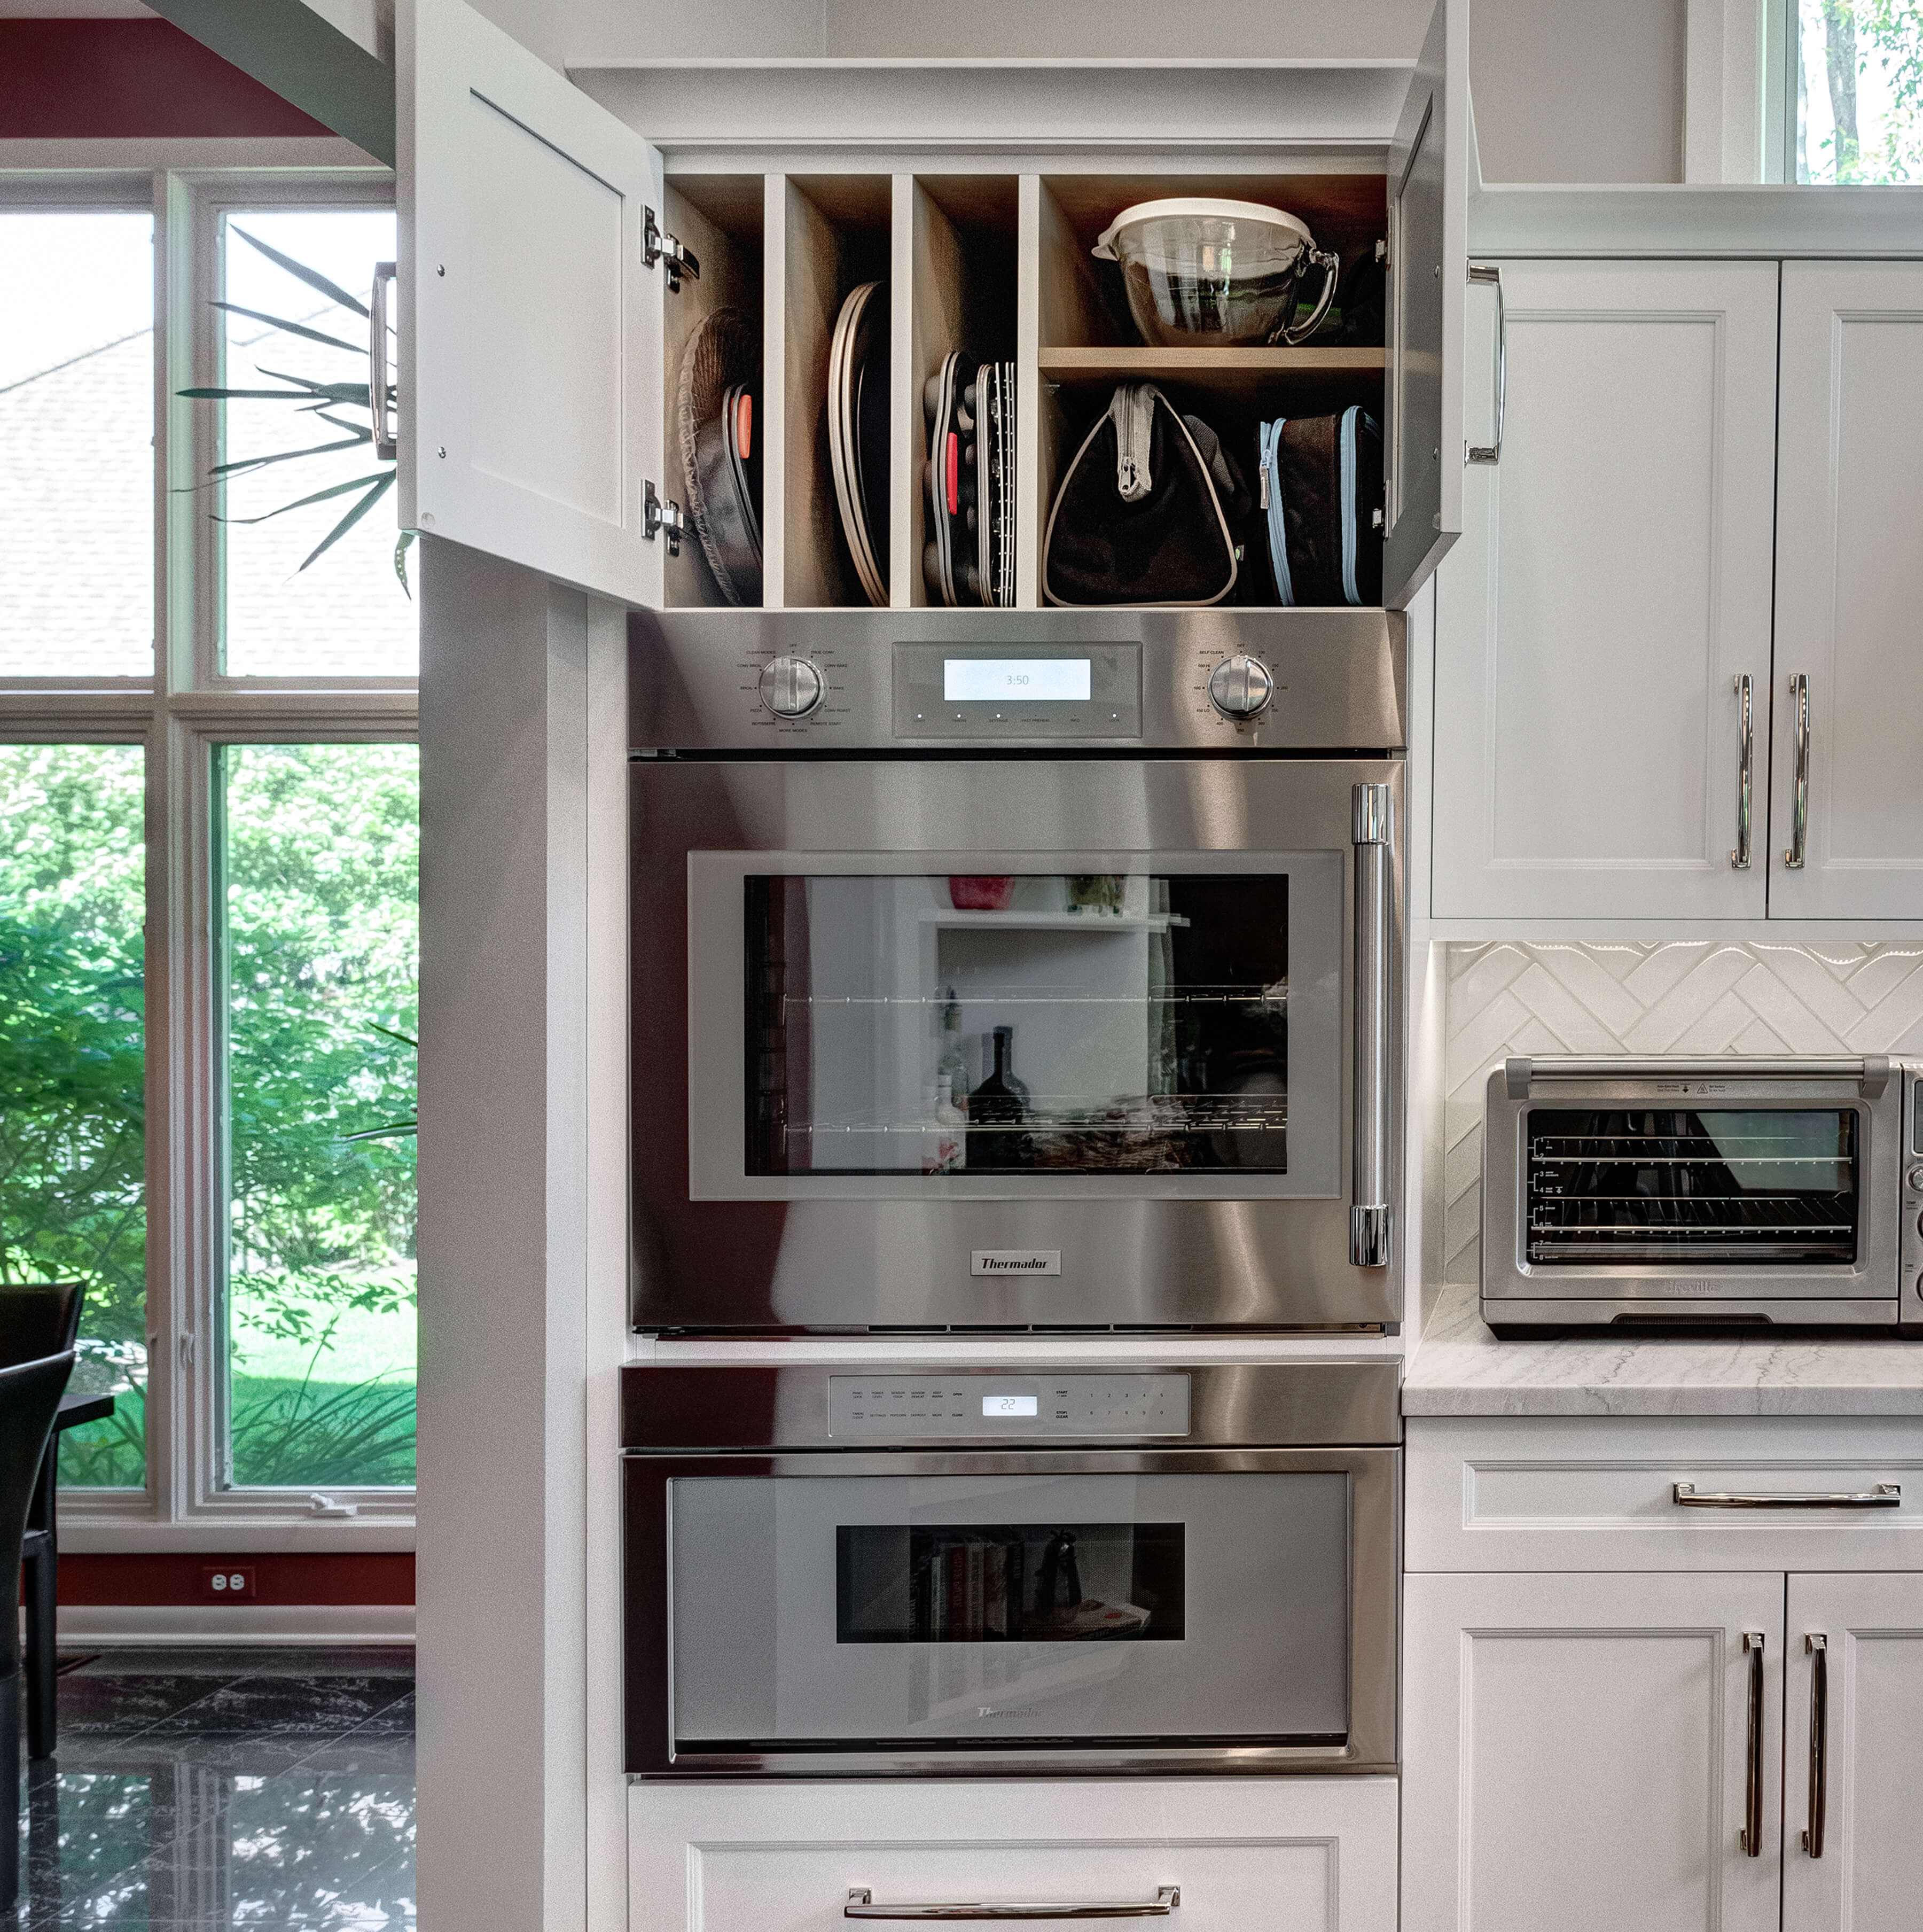 An all-white kitchen design with kitchen storage above the wall ovens using partitions for tray and pan storage and a shelf for organized bakeware containers.